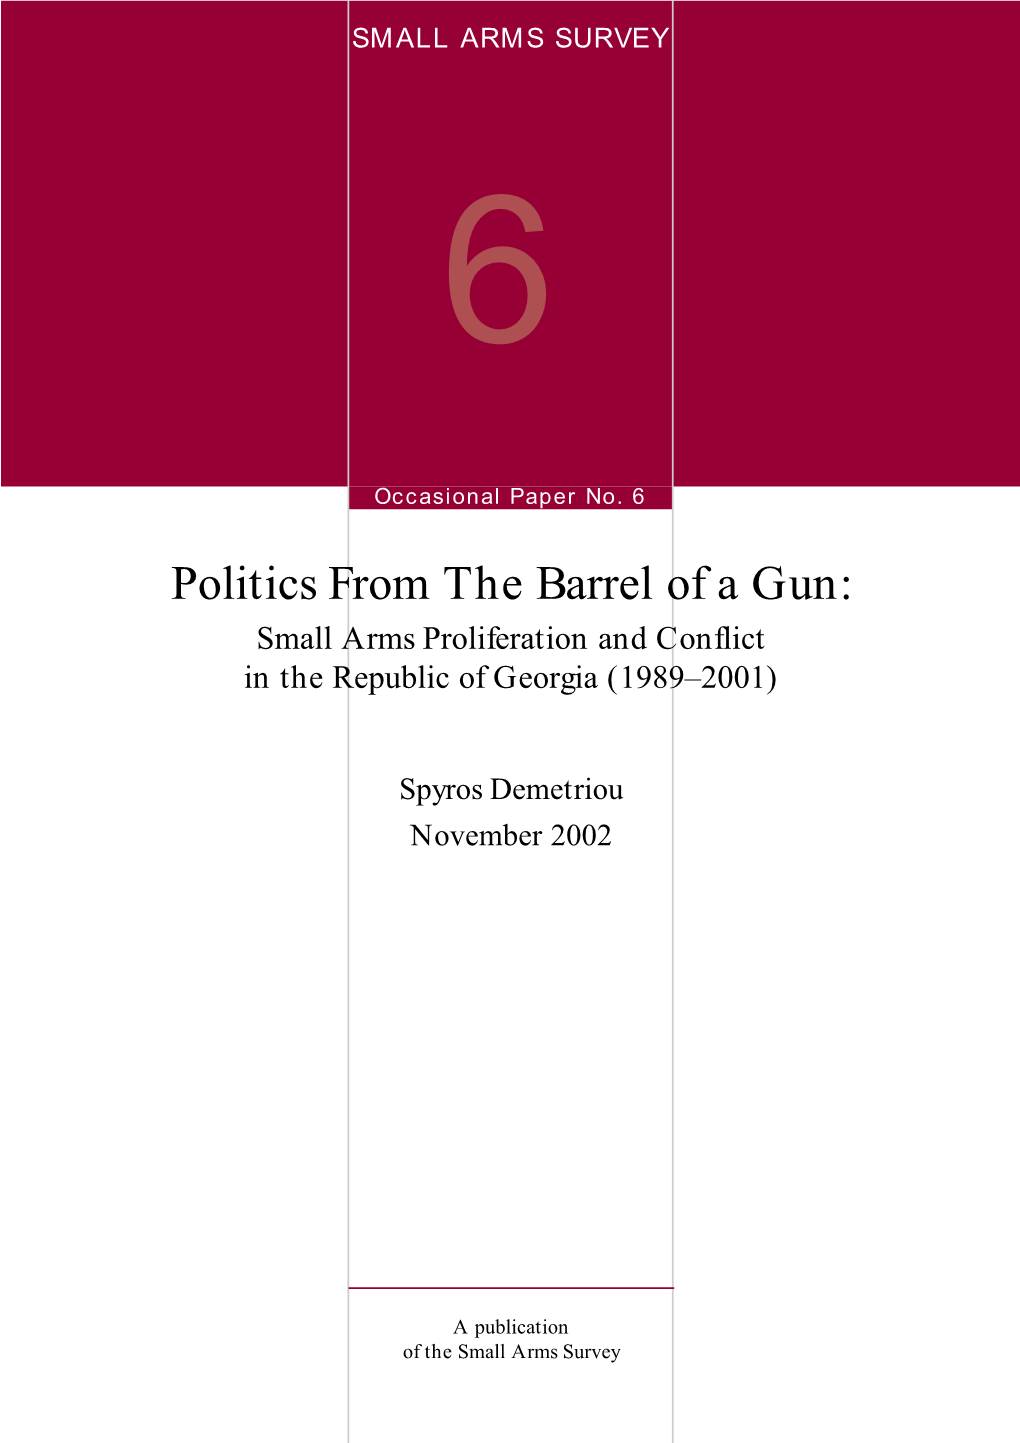 Politics from the Barrel of a Gun: Small Arms Proliferation and Conflict in the Republic of Georgia (1989–2001)